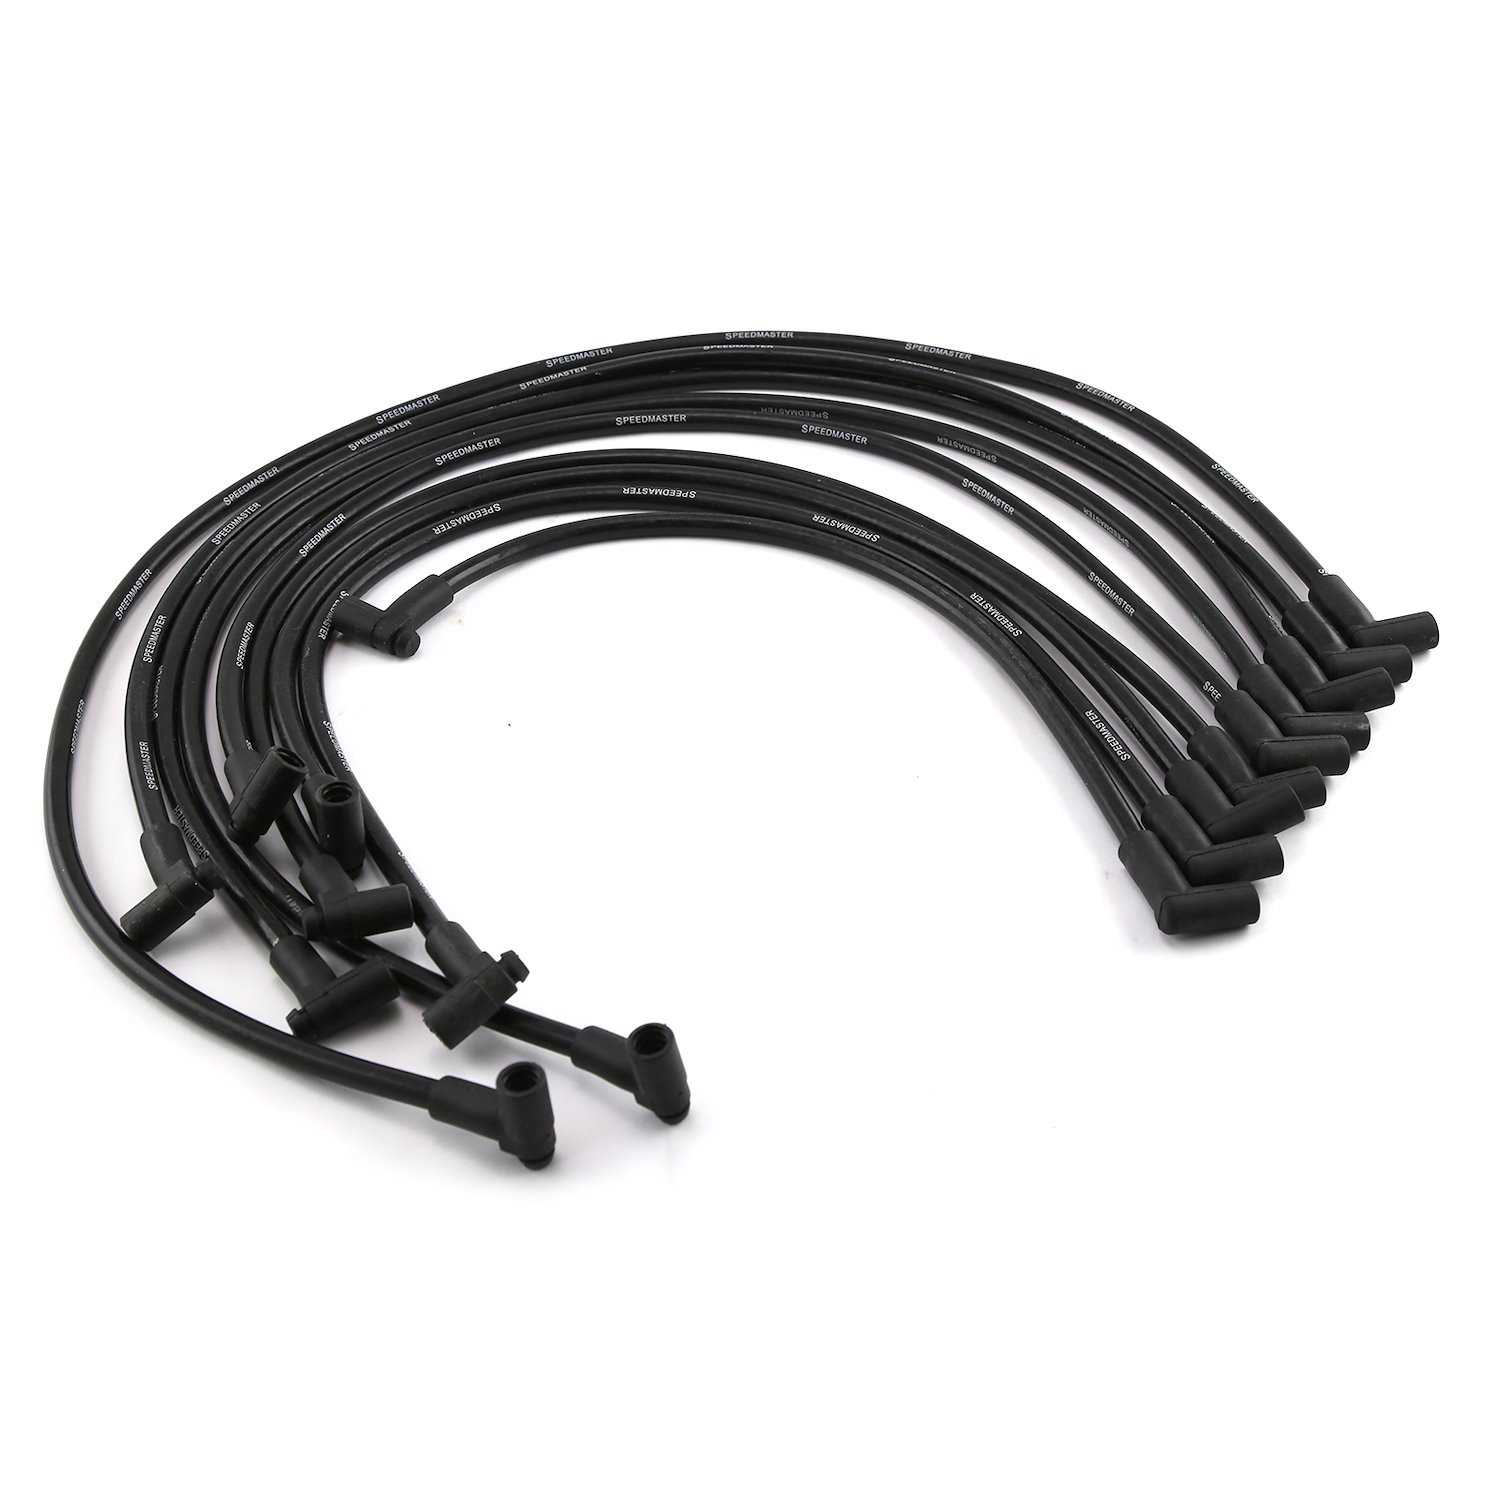 Universal 90 Deg to 90 Deg Over Covers Male Black Spark Plug Wires Suits Chevy